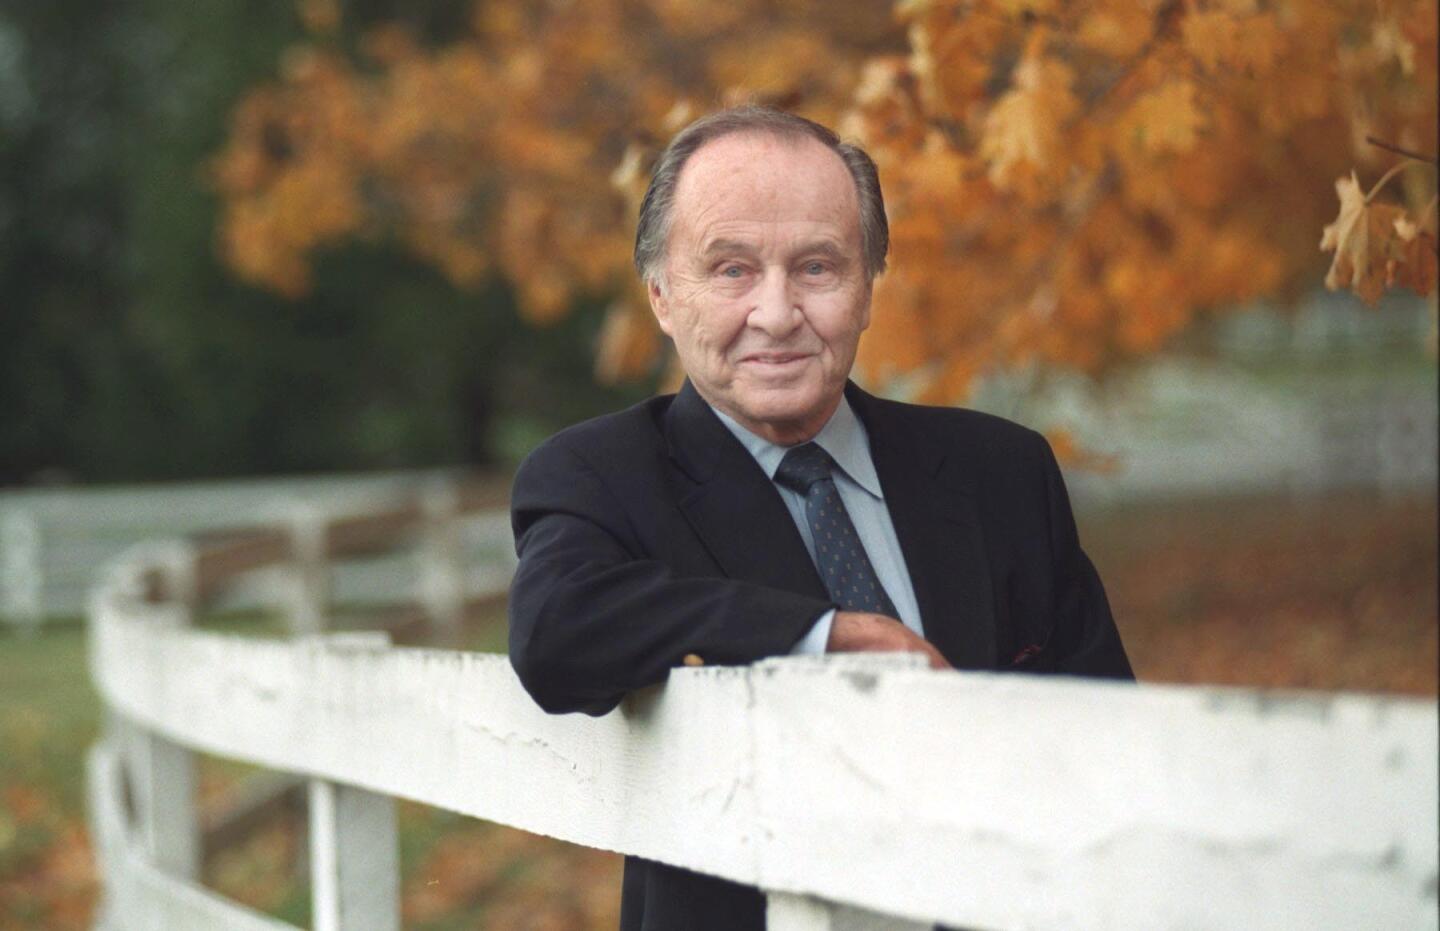 ABC sportscaster Jim McKay is celebrating his 50th. year in broadcasting and is writing a book about those years. The former Baltimore Sun reporter moved on to host ABC's "Wide World of Sports" for nearly four decades. The Loyola graduate ('43) died in 2008. Shown is Mckay at his farm in Monkton in 1997.